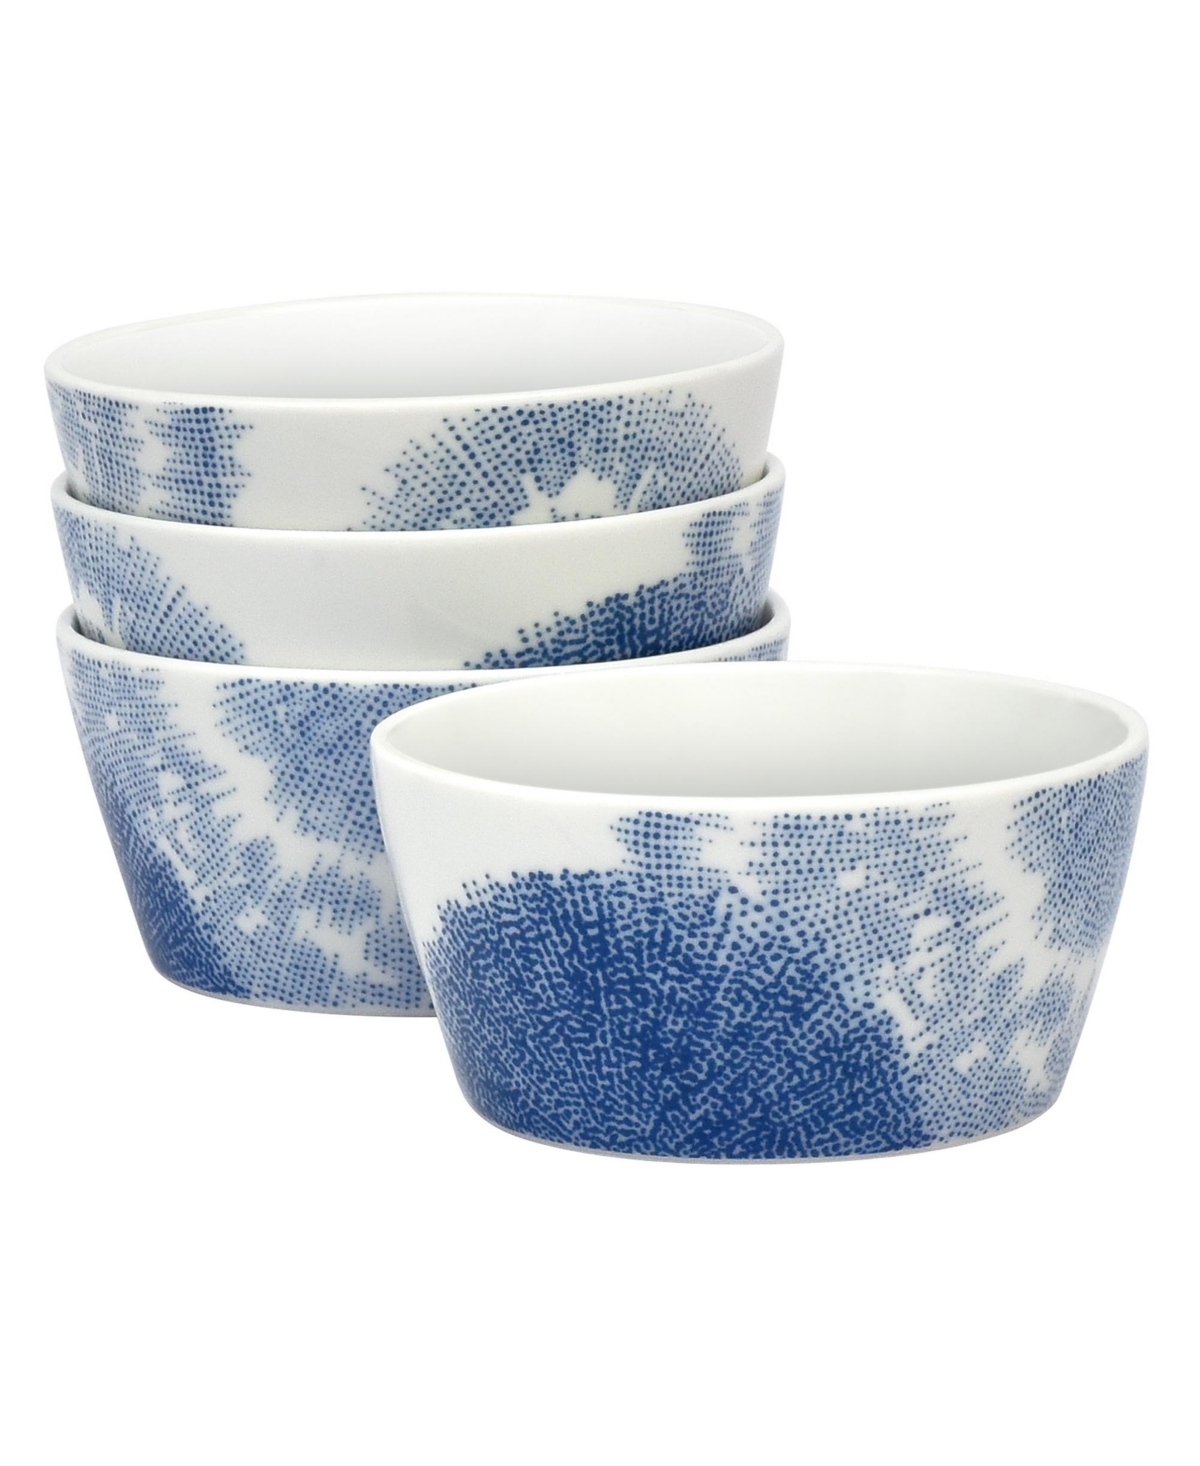 Aozora Set/4 Cereal Bowls - White And Blue